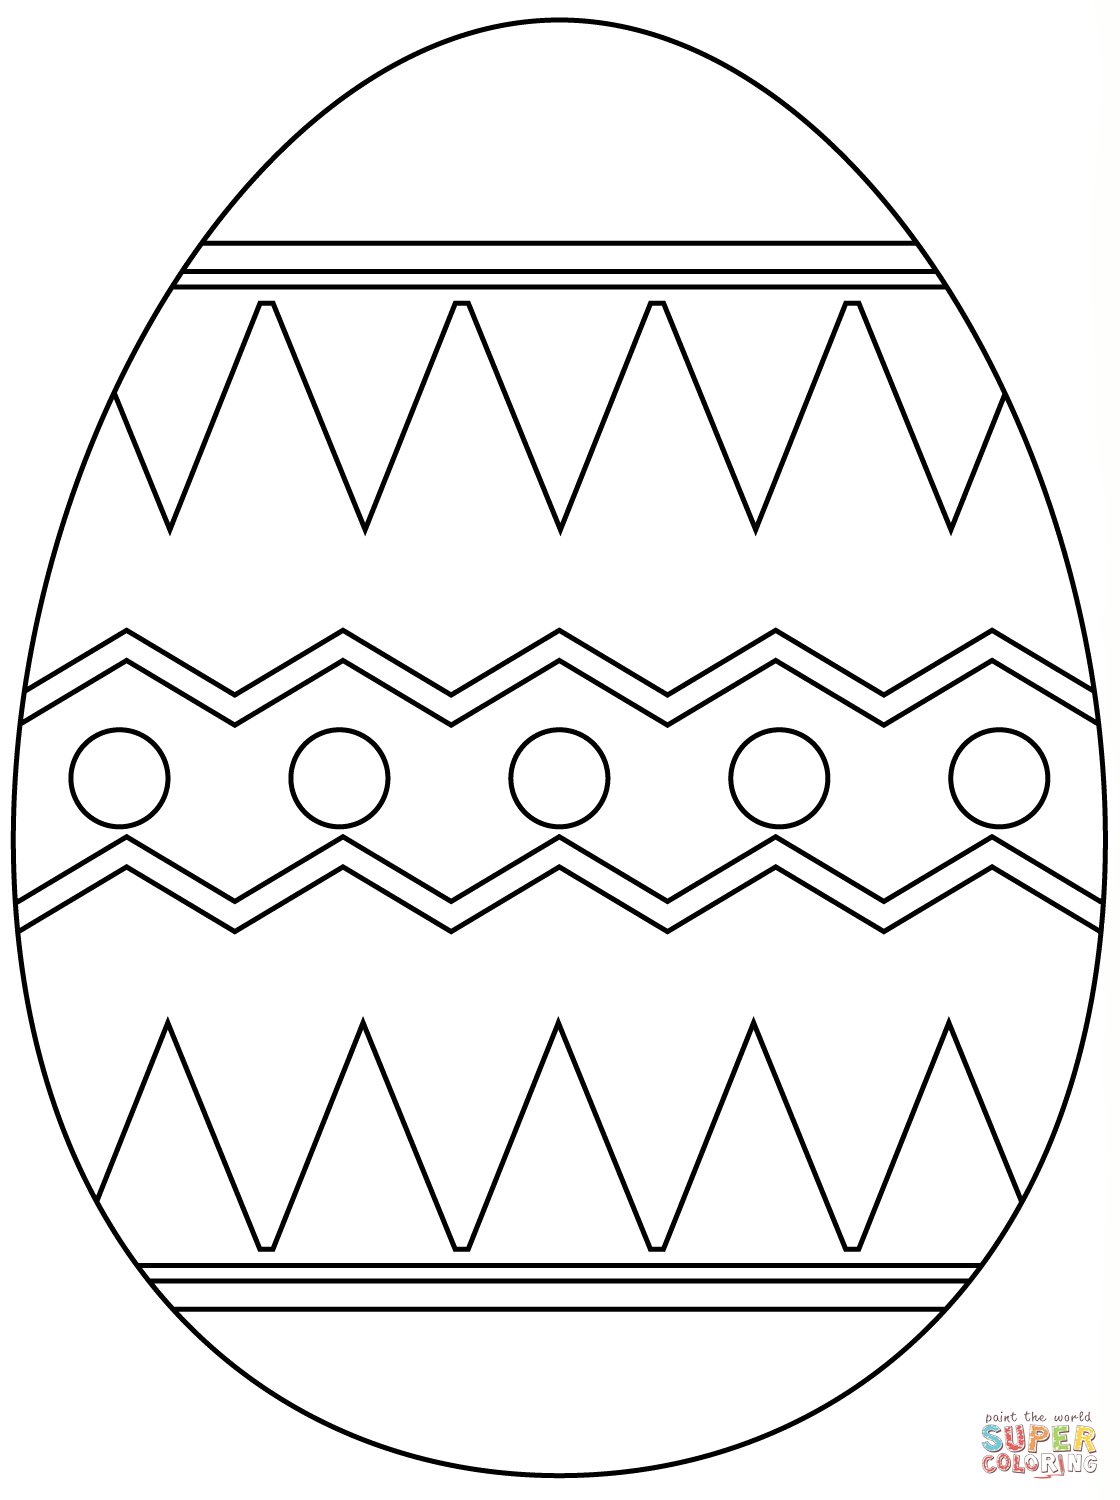 Easter Eggs Coloring Pages | Free Coloring Pages - Free Printable Easter Stuff